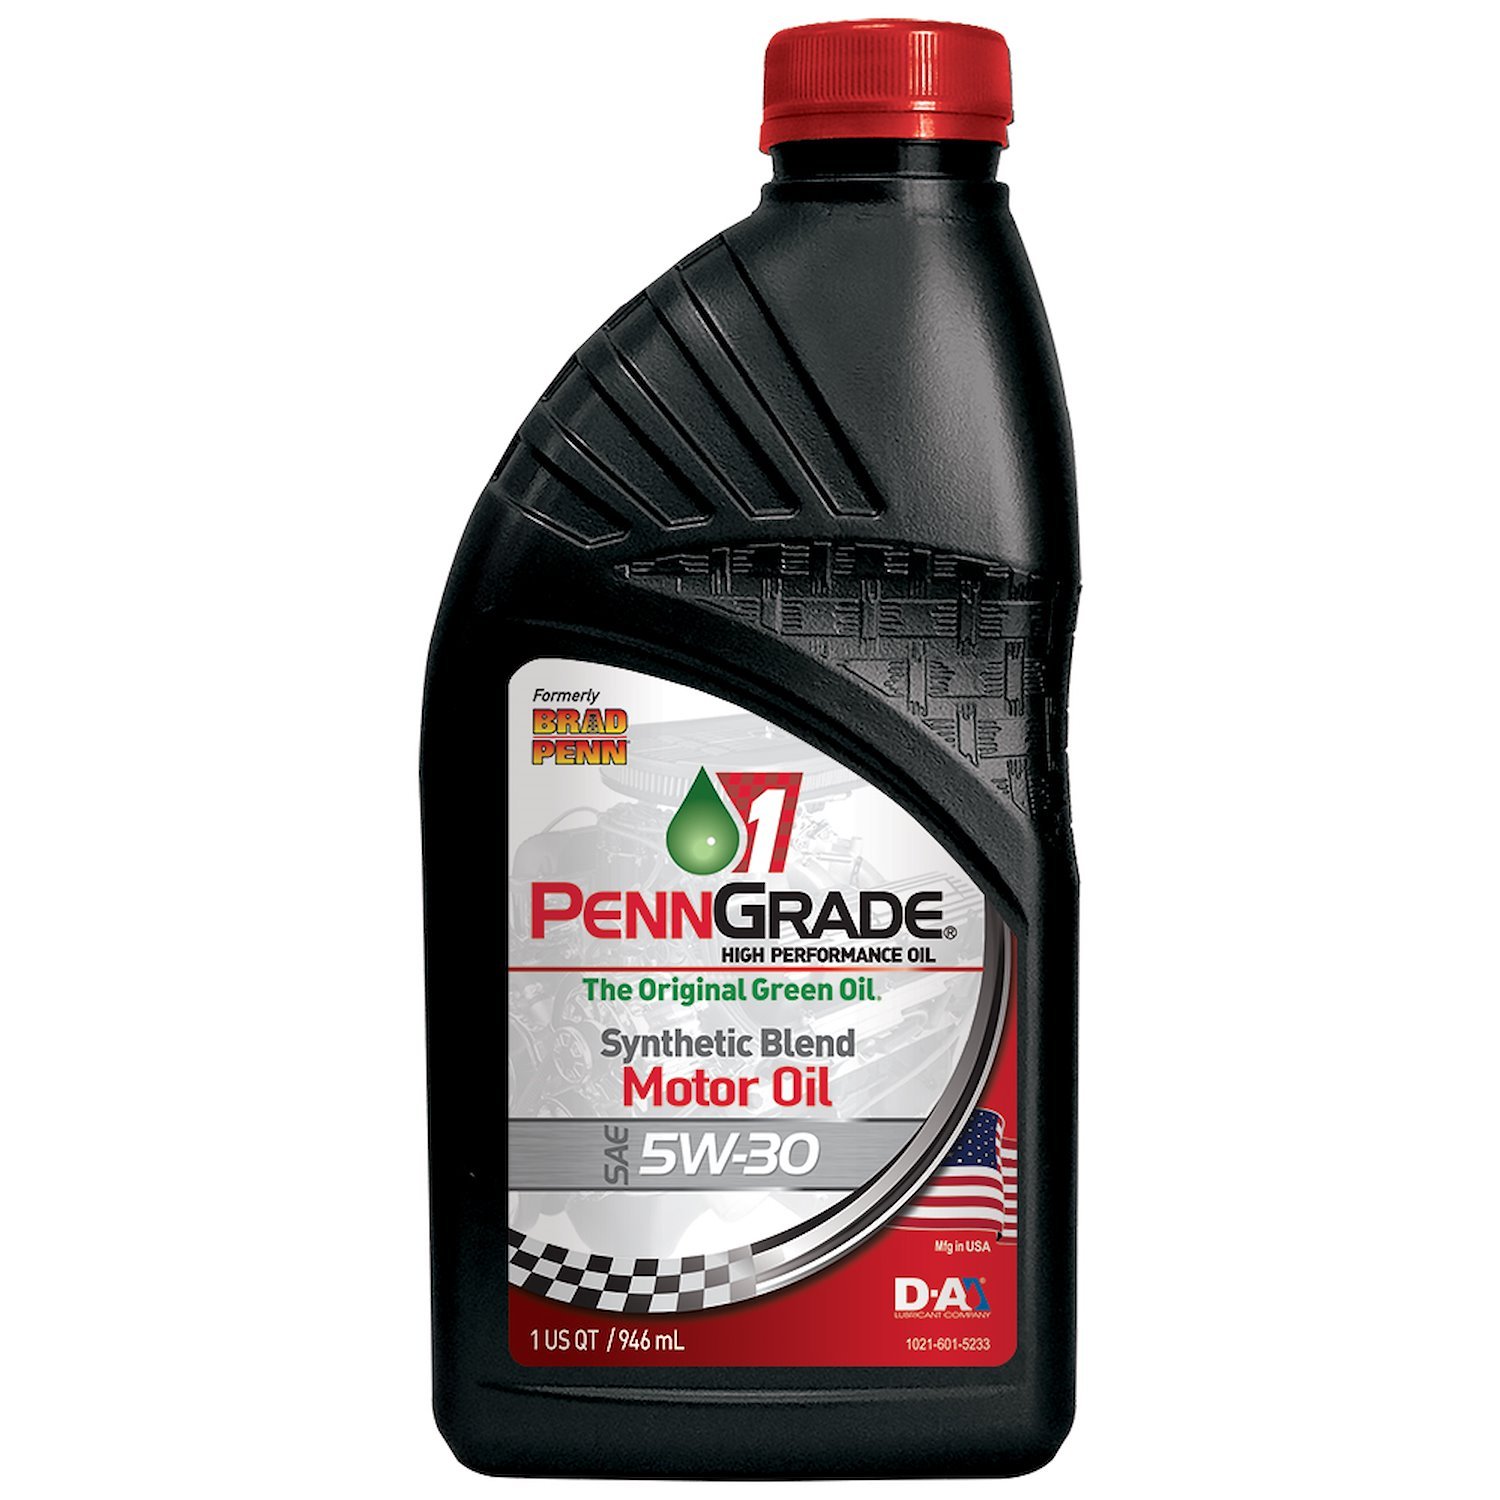 Penn-Grade 1 Partial Synthetic Motor Oil SAE 5W-30 - 12 Qts